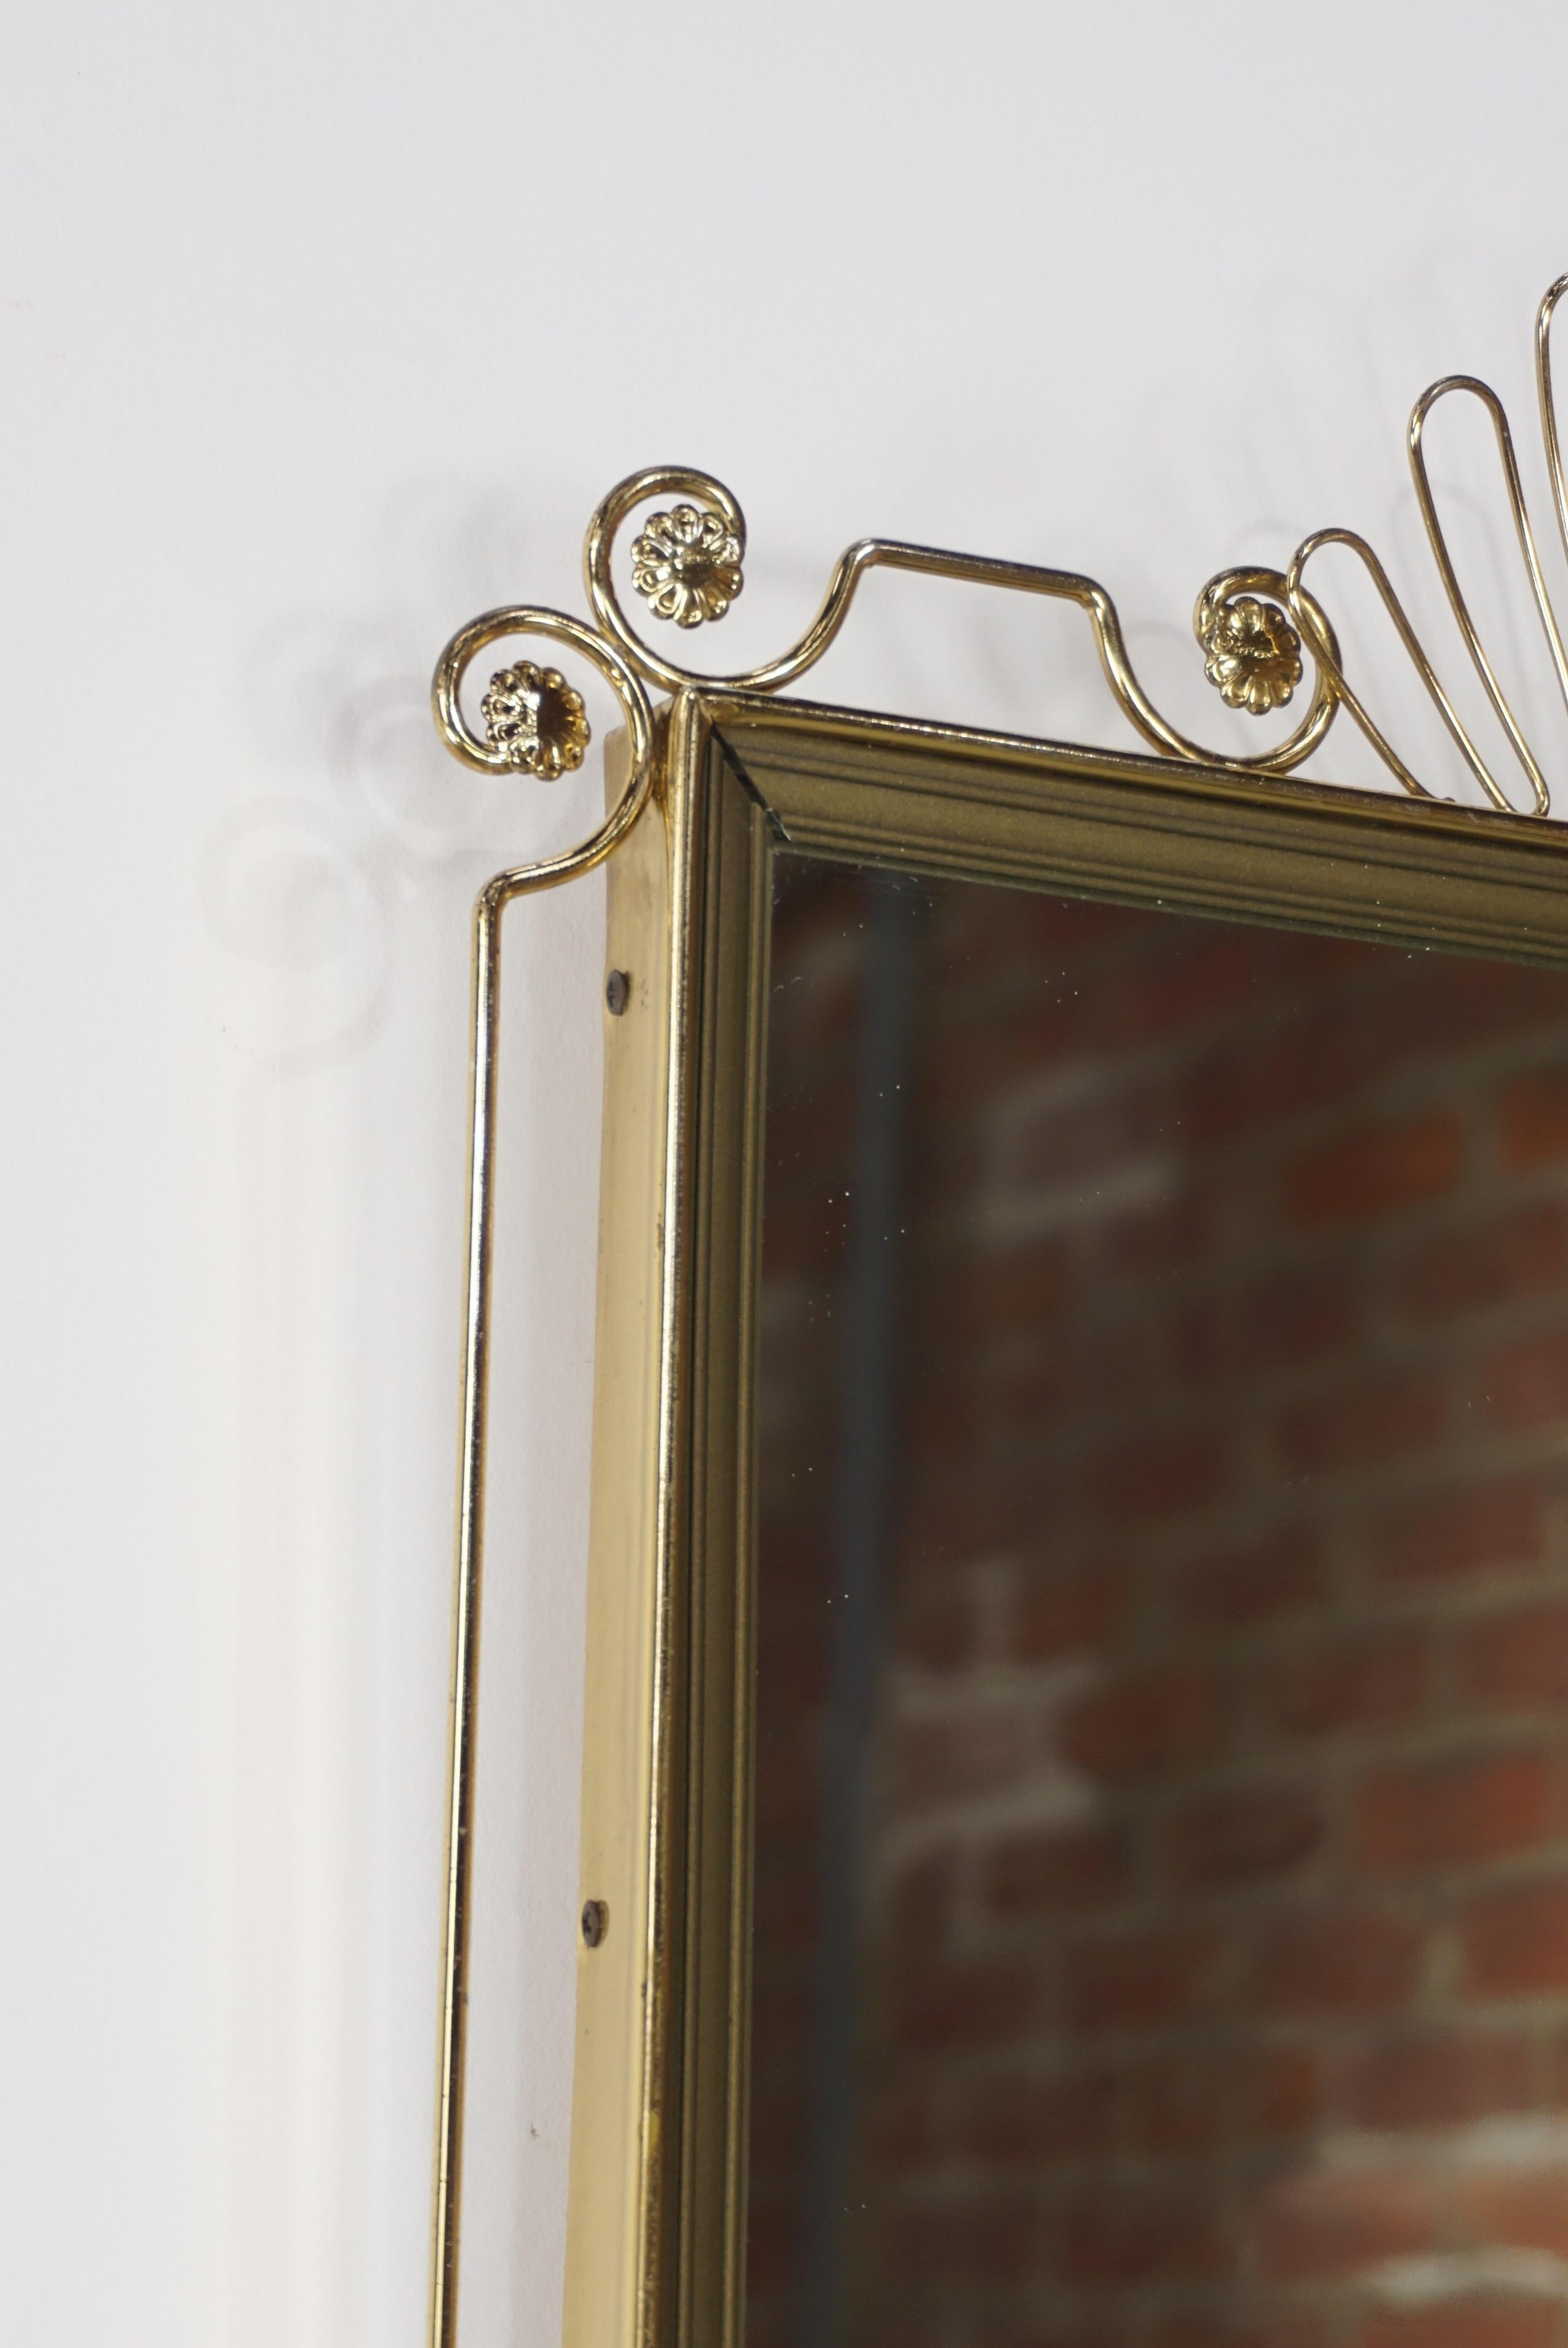 Rectangular brass metal mirror 1950s design with fine brass scrolls and trappings bordering the whole frame.